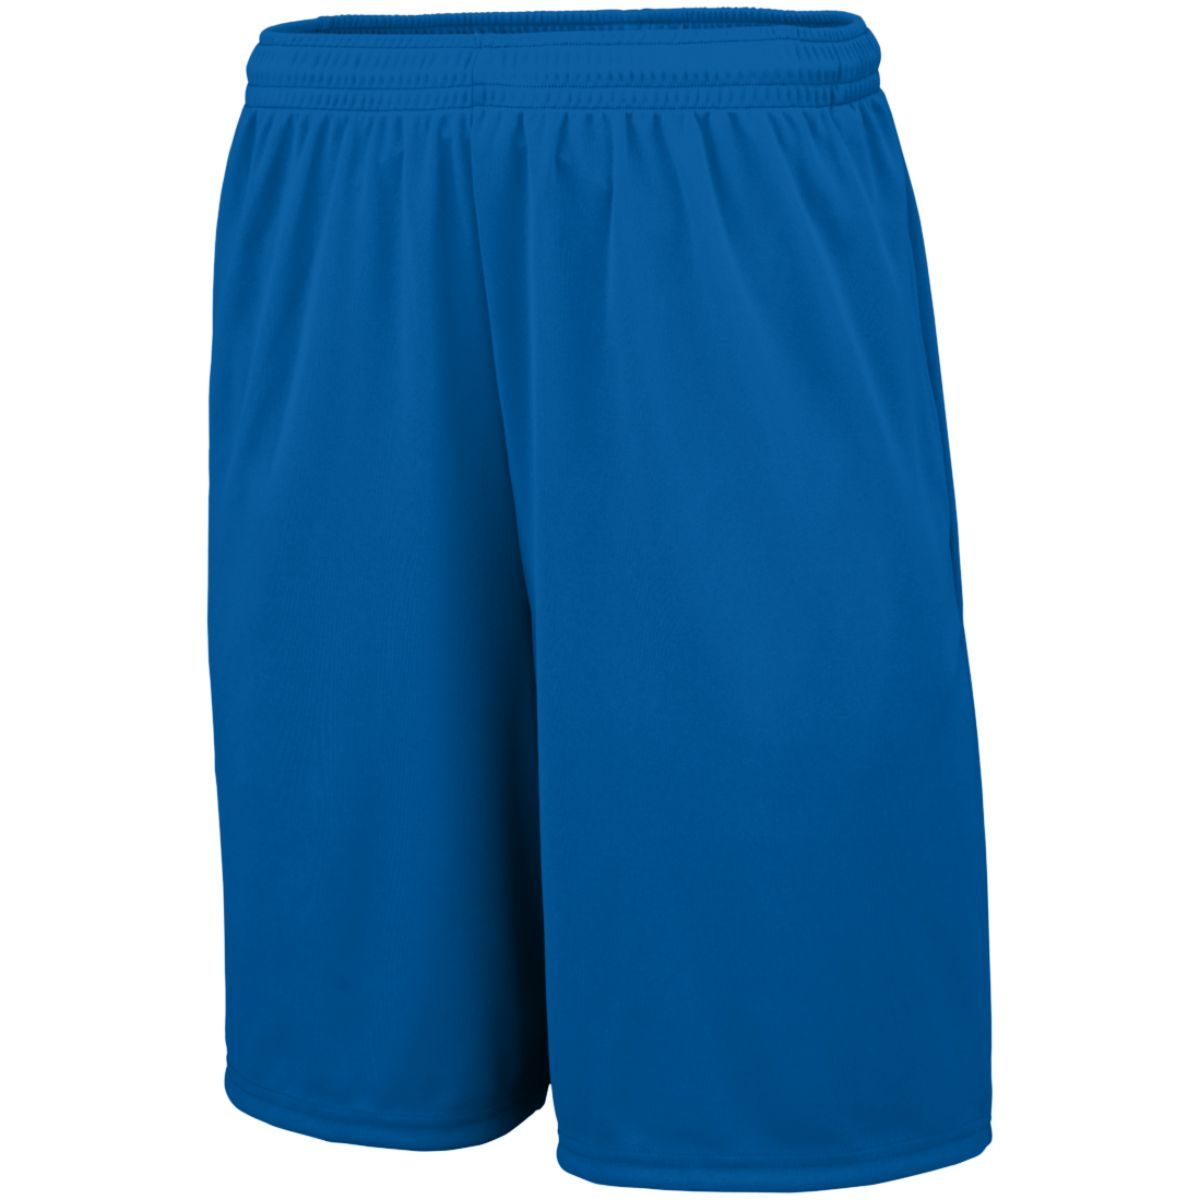 Youth Training Shorts With Pockets 1429